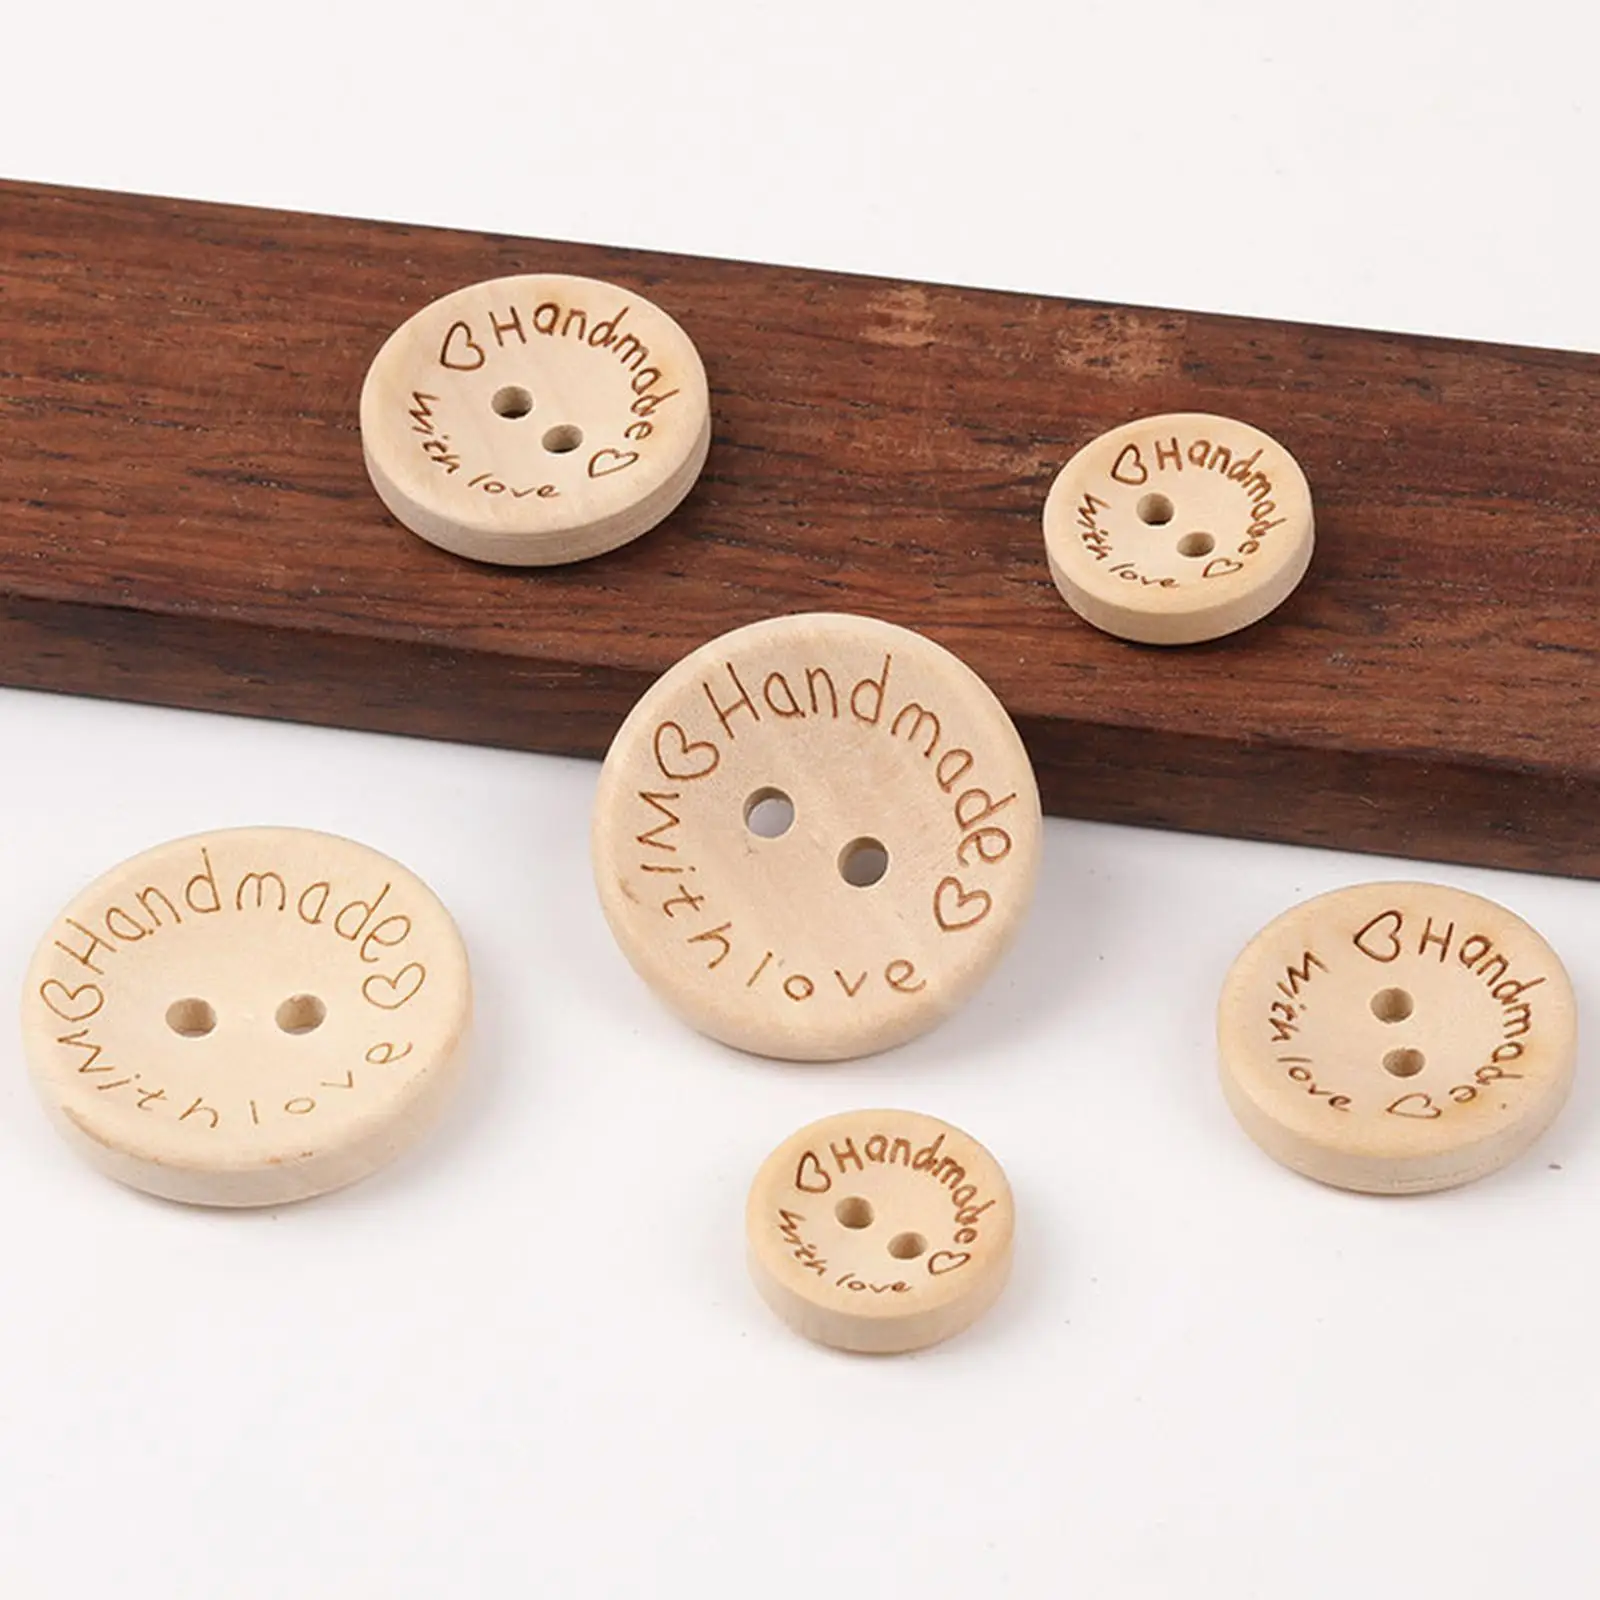 140x Wooden Handmade Buttons with Love Round Shape Sizes Mixed Crafts Sewing Buttons for Crocheting Card Making Knitting Decor